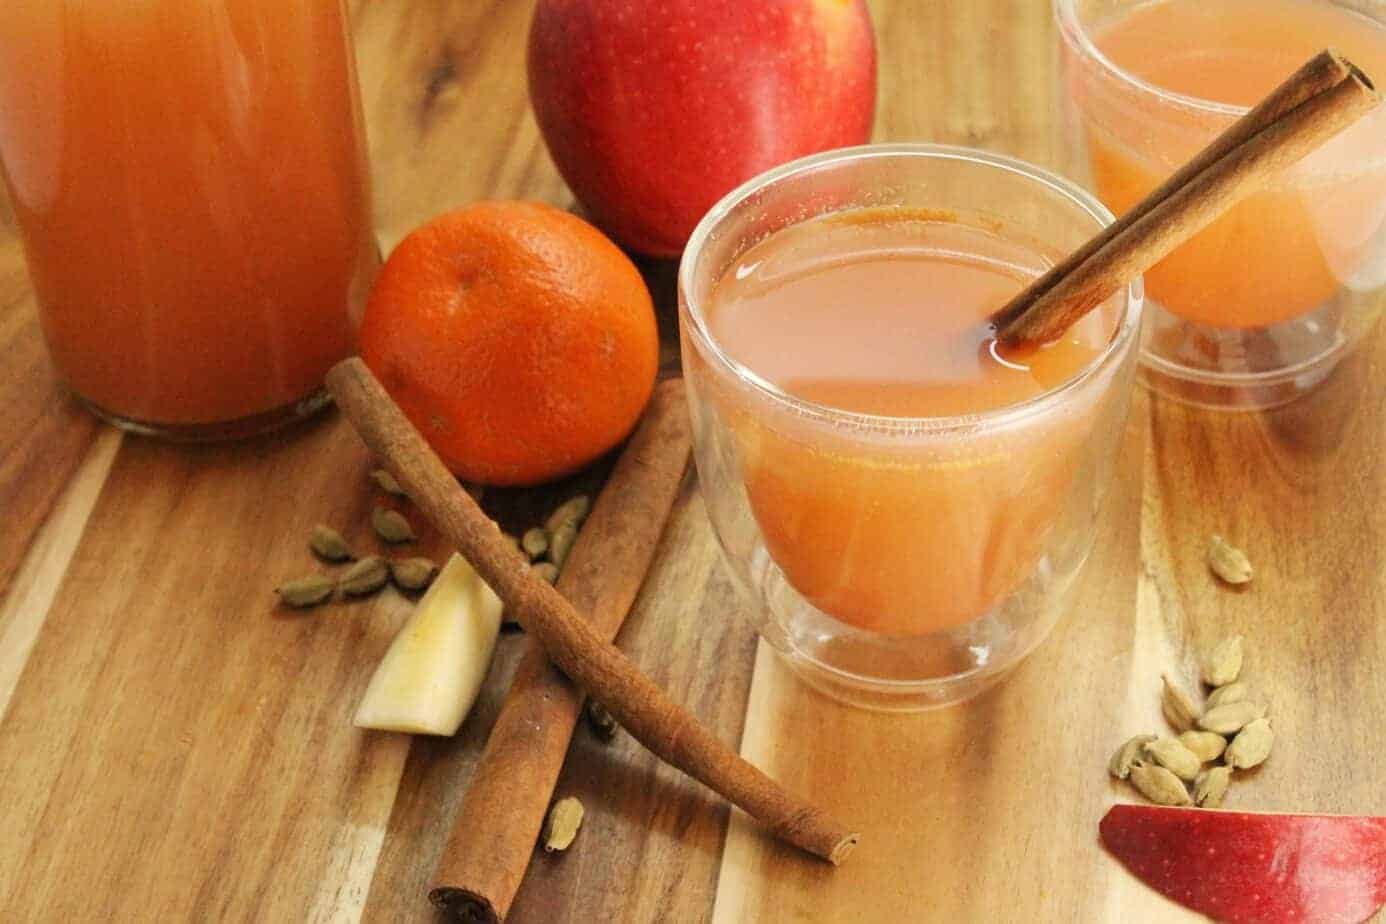 A warm mulled apple cider, perfect to relax with on a cool fall day.